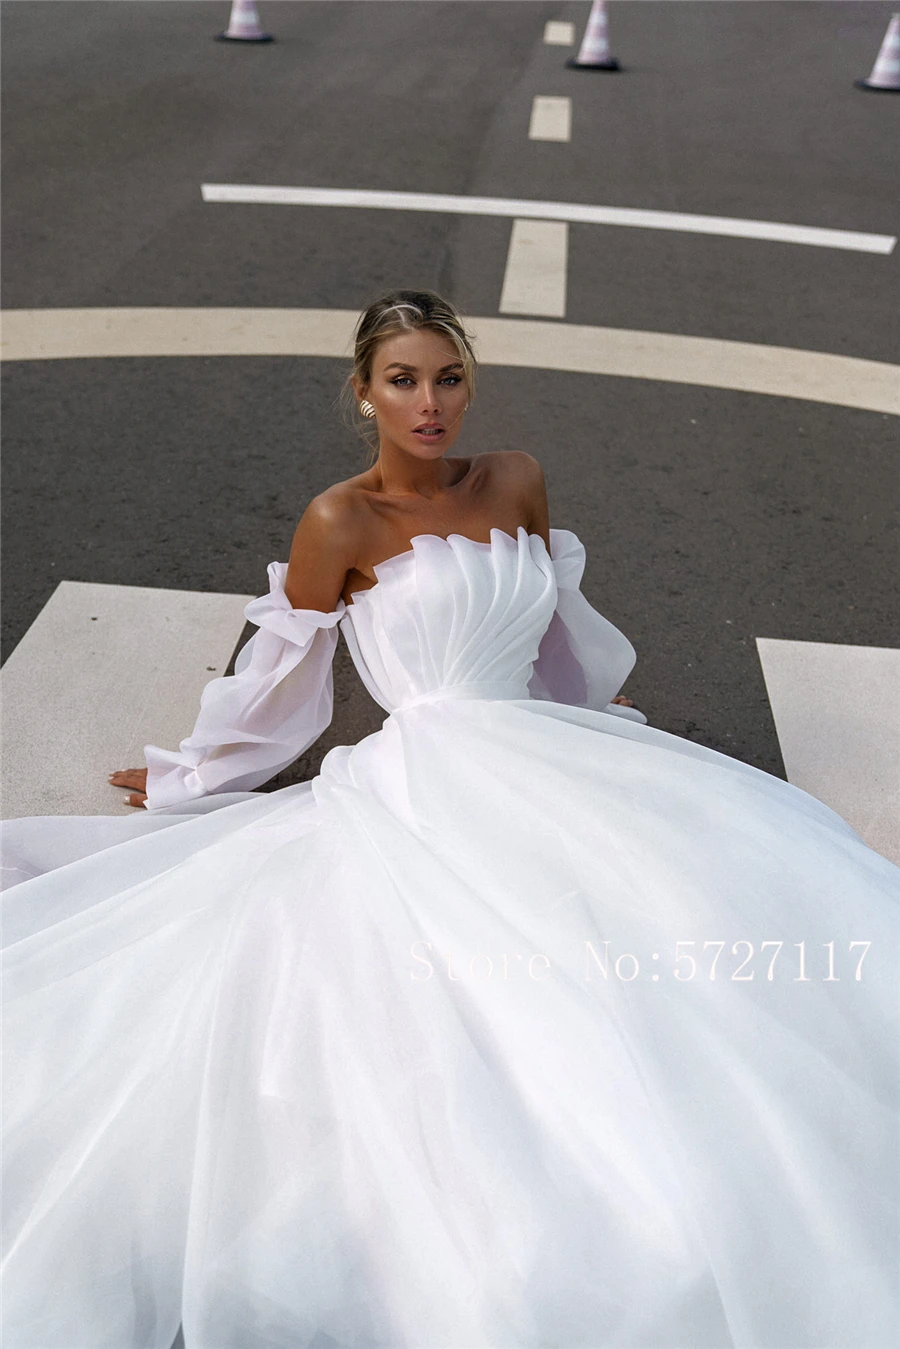 lace wedding dress Strapless Ruched Bodice Ball Gowns 2080 Organza Wedding Dress with Detachable Long Sleeves Empire Bridal Gowns vintage wedding dresses